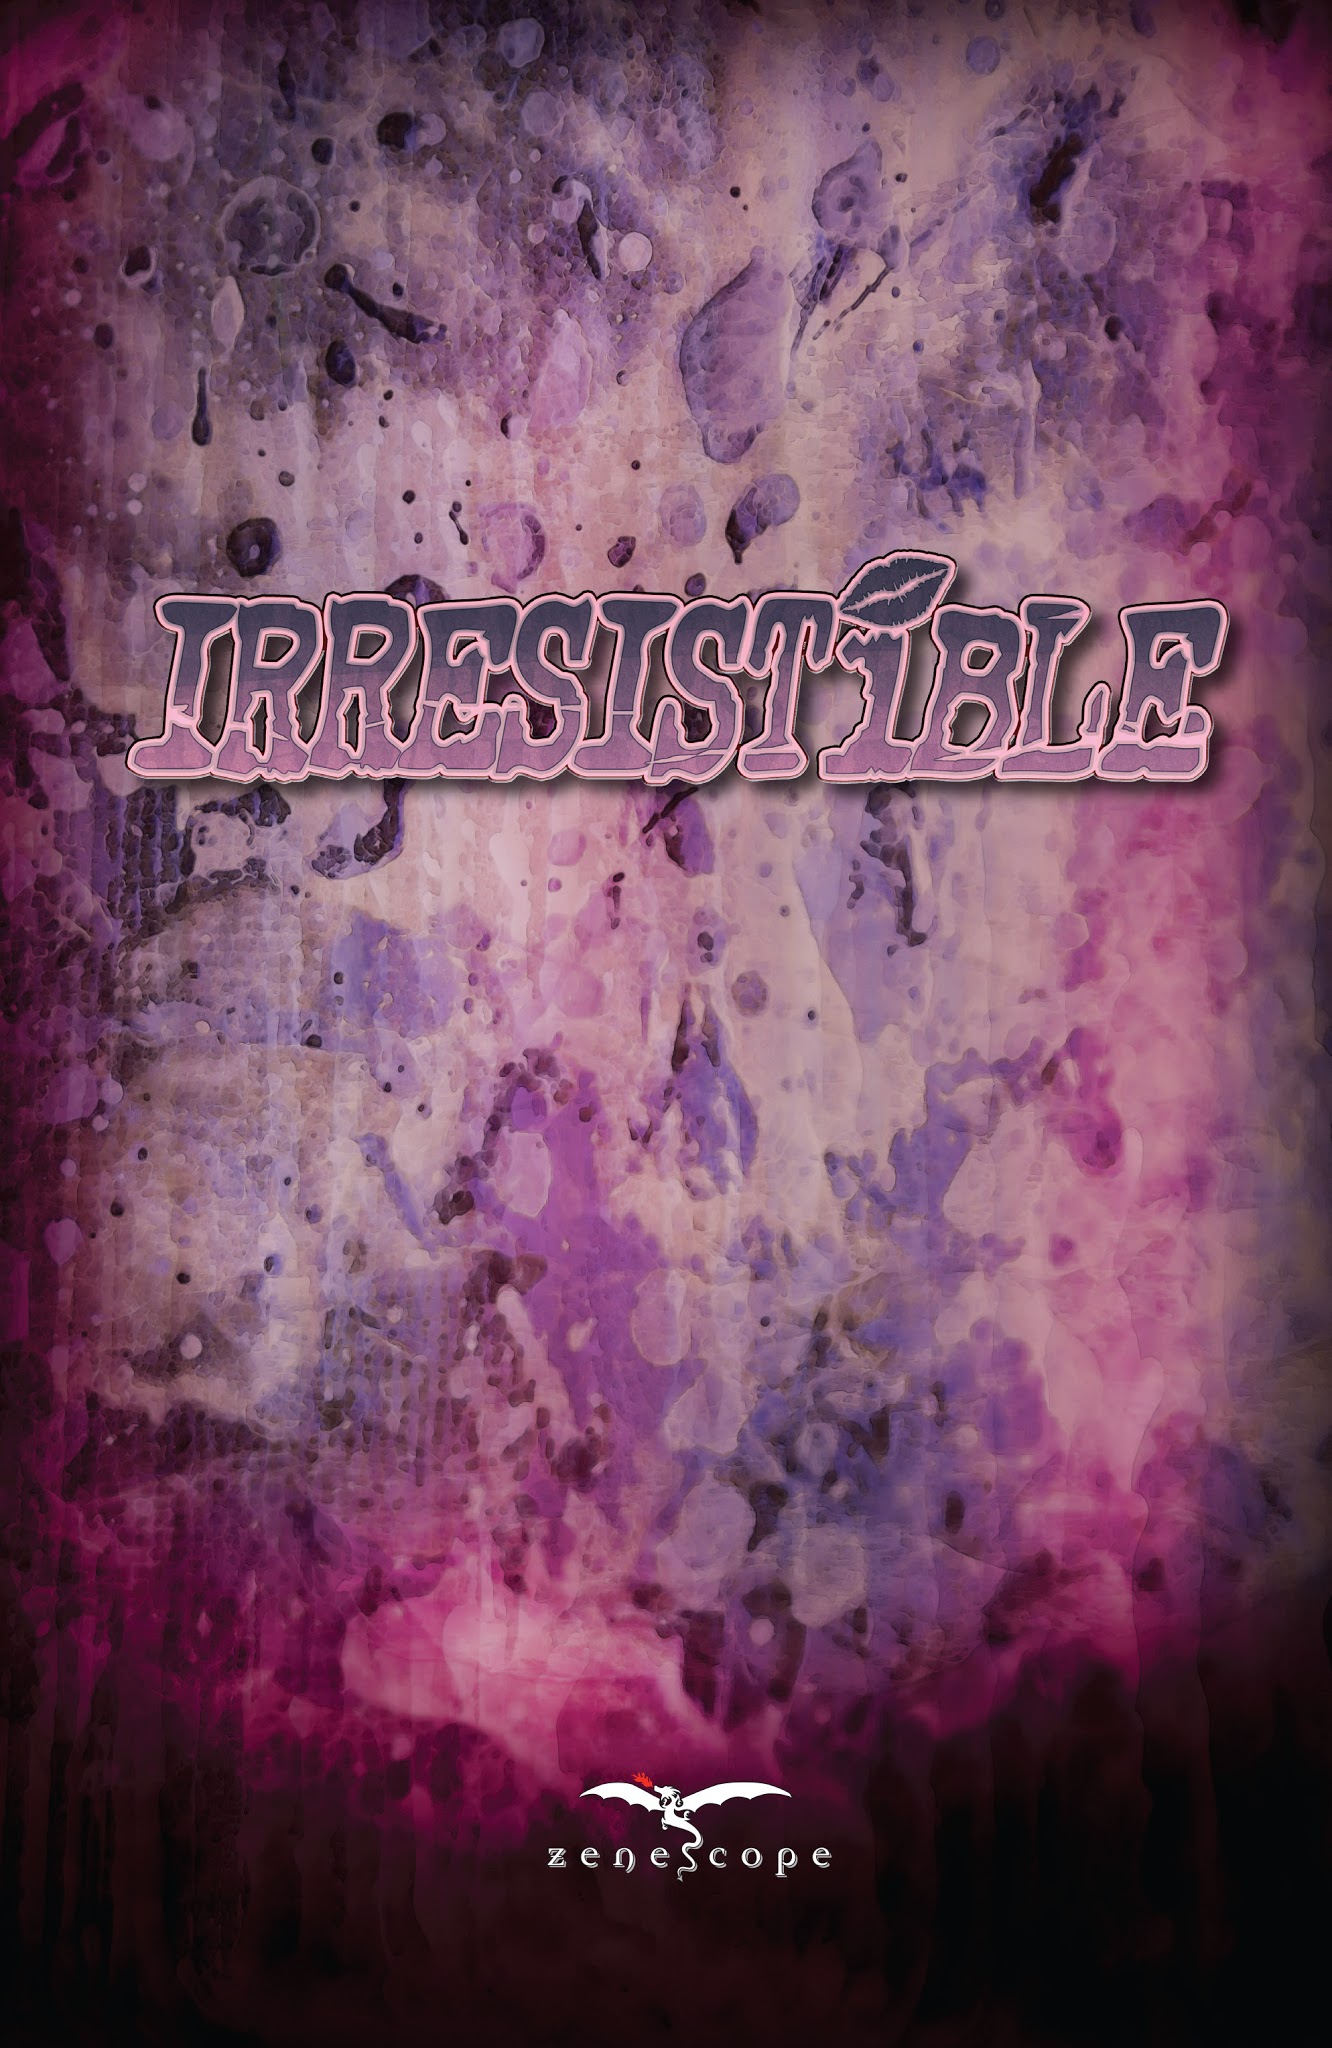 Read online Irresistible comic -  Issue # TPB - 2